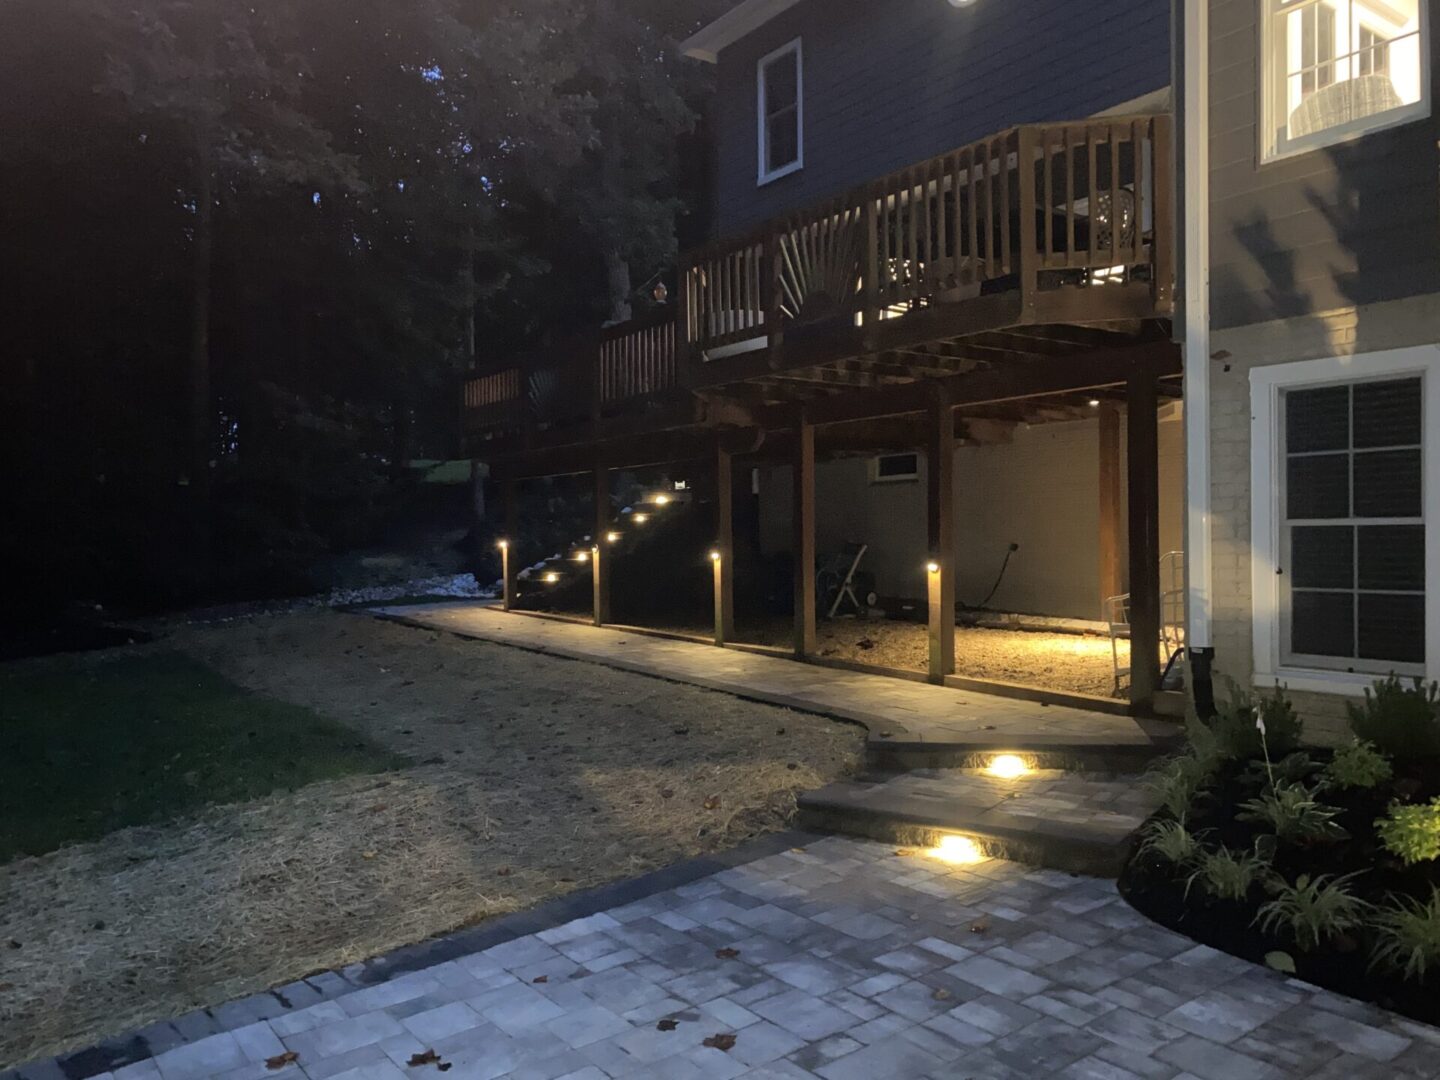 A patio with lights and a walkway at night.